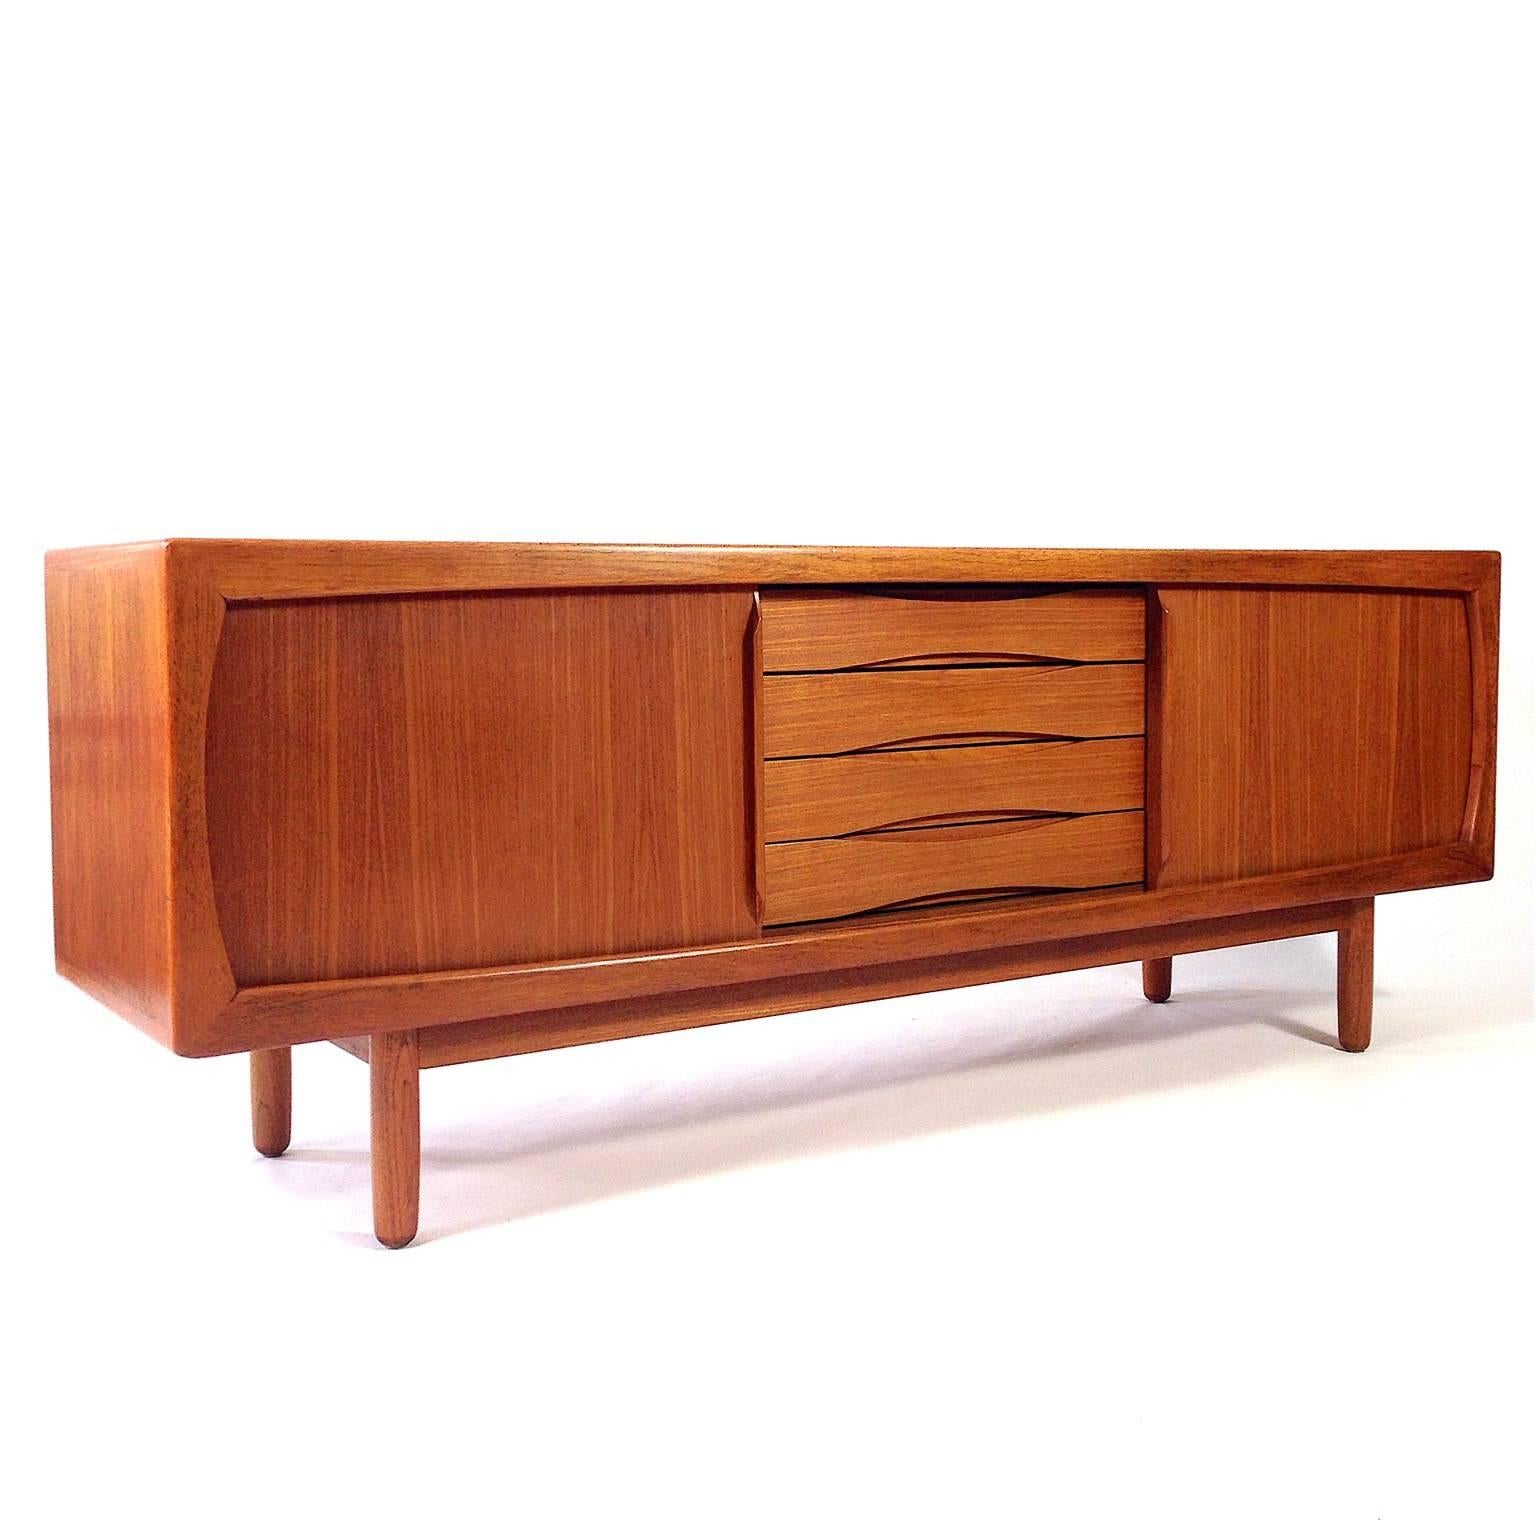 Beautiful teak credenza by Dyrlund Denmark from the 1960's. 
In excellent condition.
Made of a combination of solid and veneer Teak.
With 2 sliding doors and 4 drawers.
